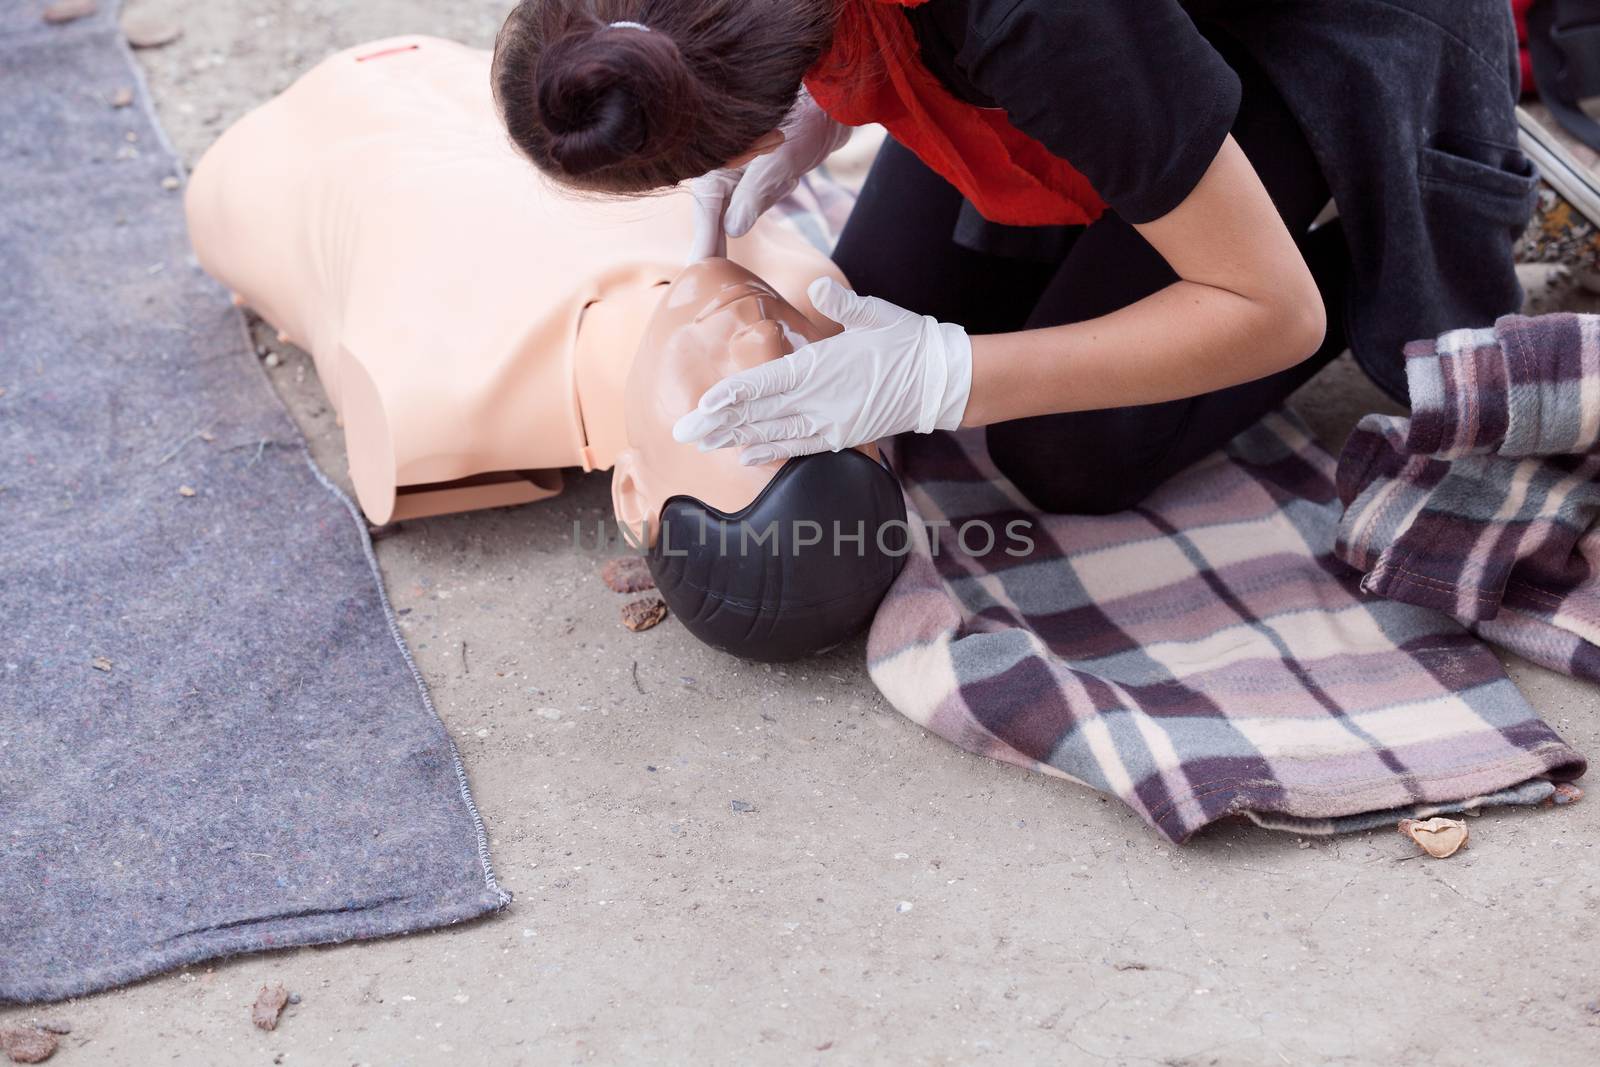 Taking a pulse. Female paramedic showing cardiopulmonary resuscitation - CPR on training dummy. by wellphoto